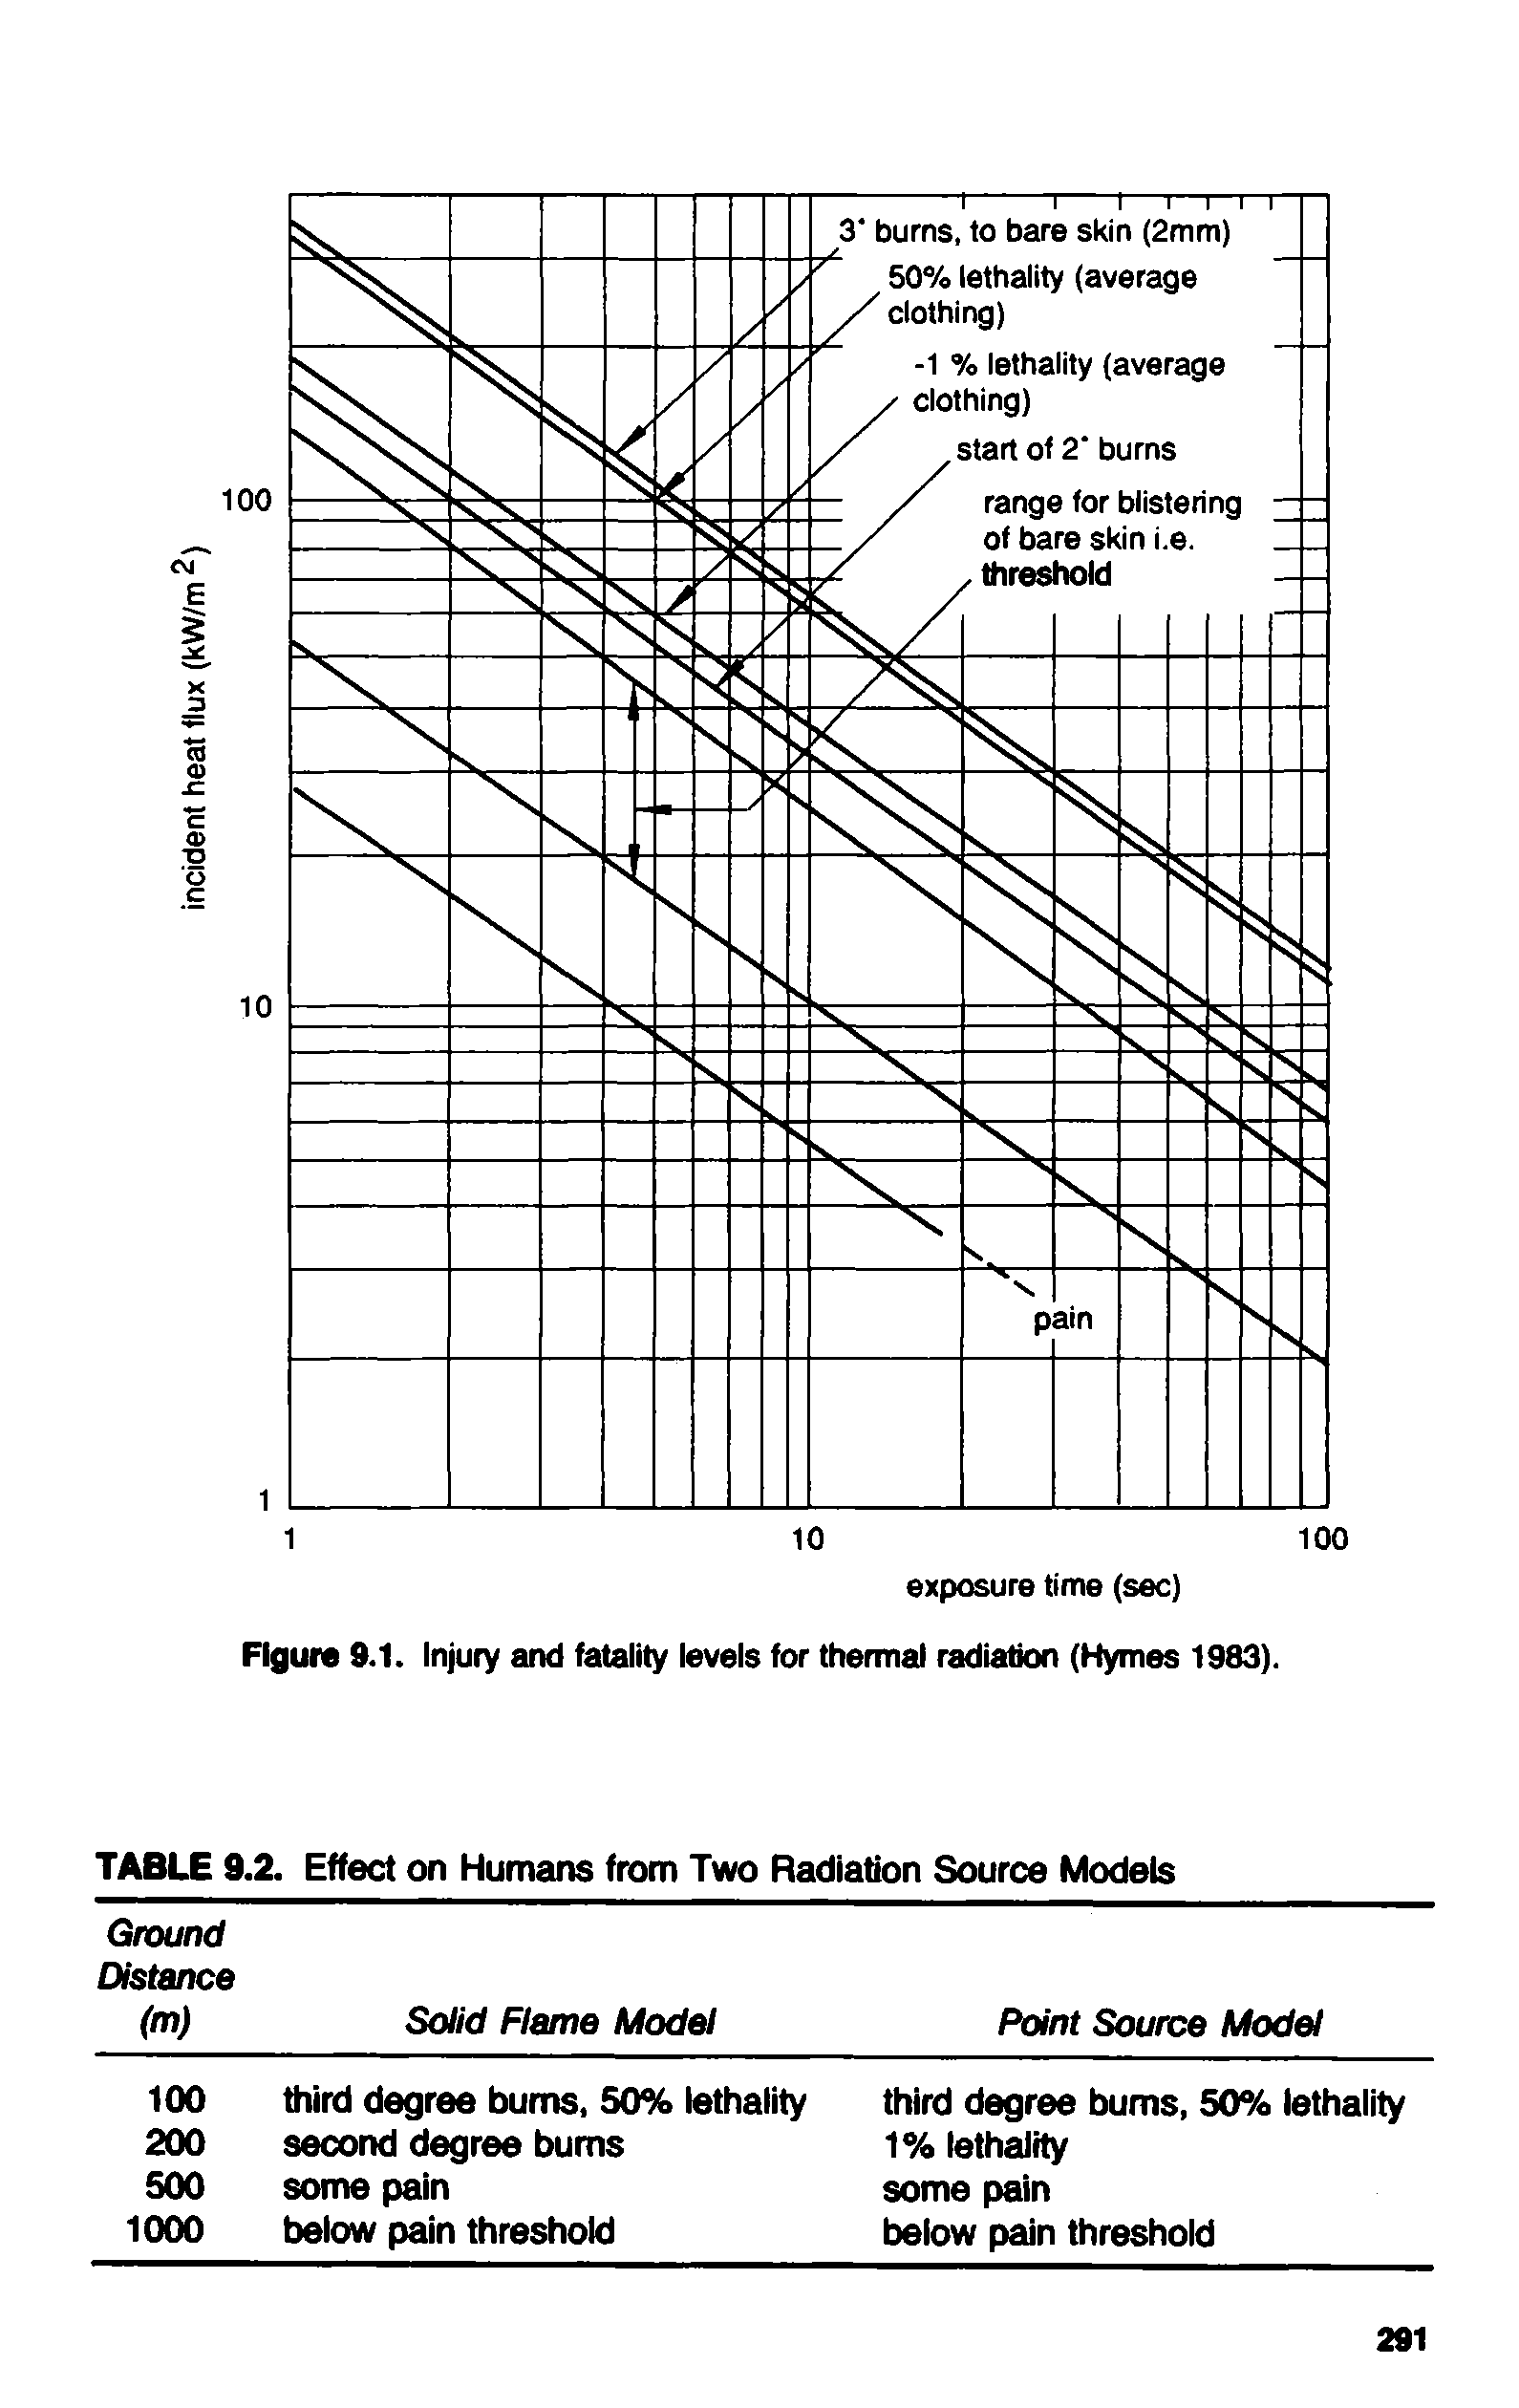 Figure 9.1. Injury and fatality levels for thermal radiation (Hymes 1983).